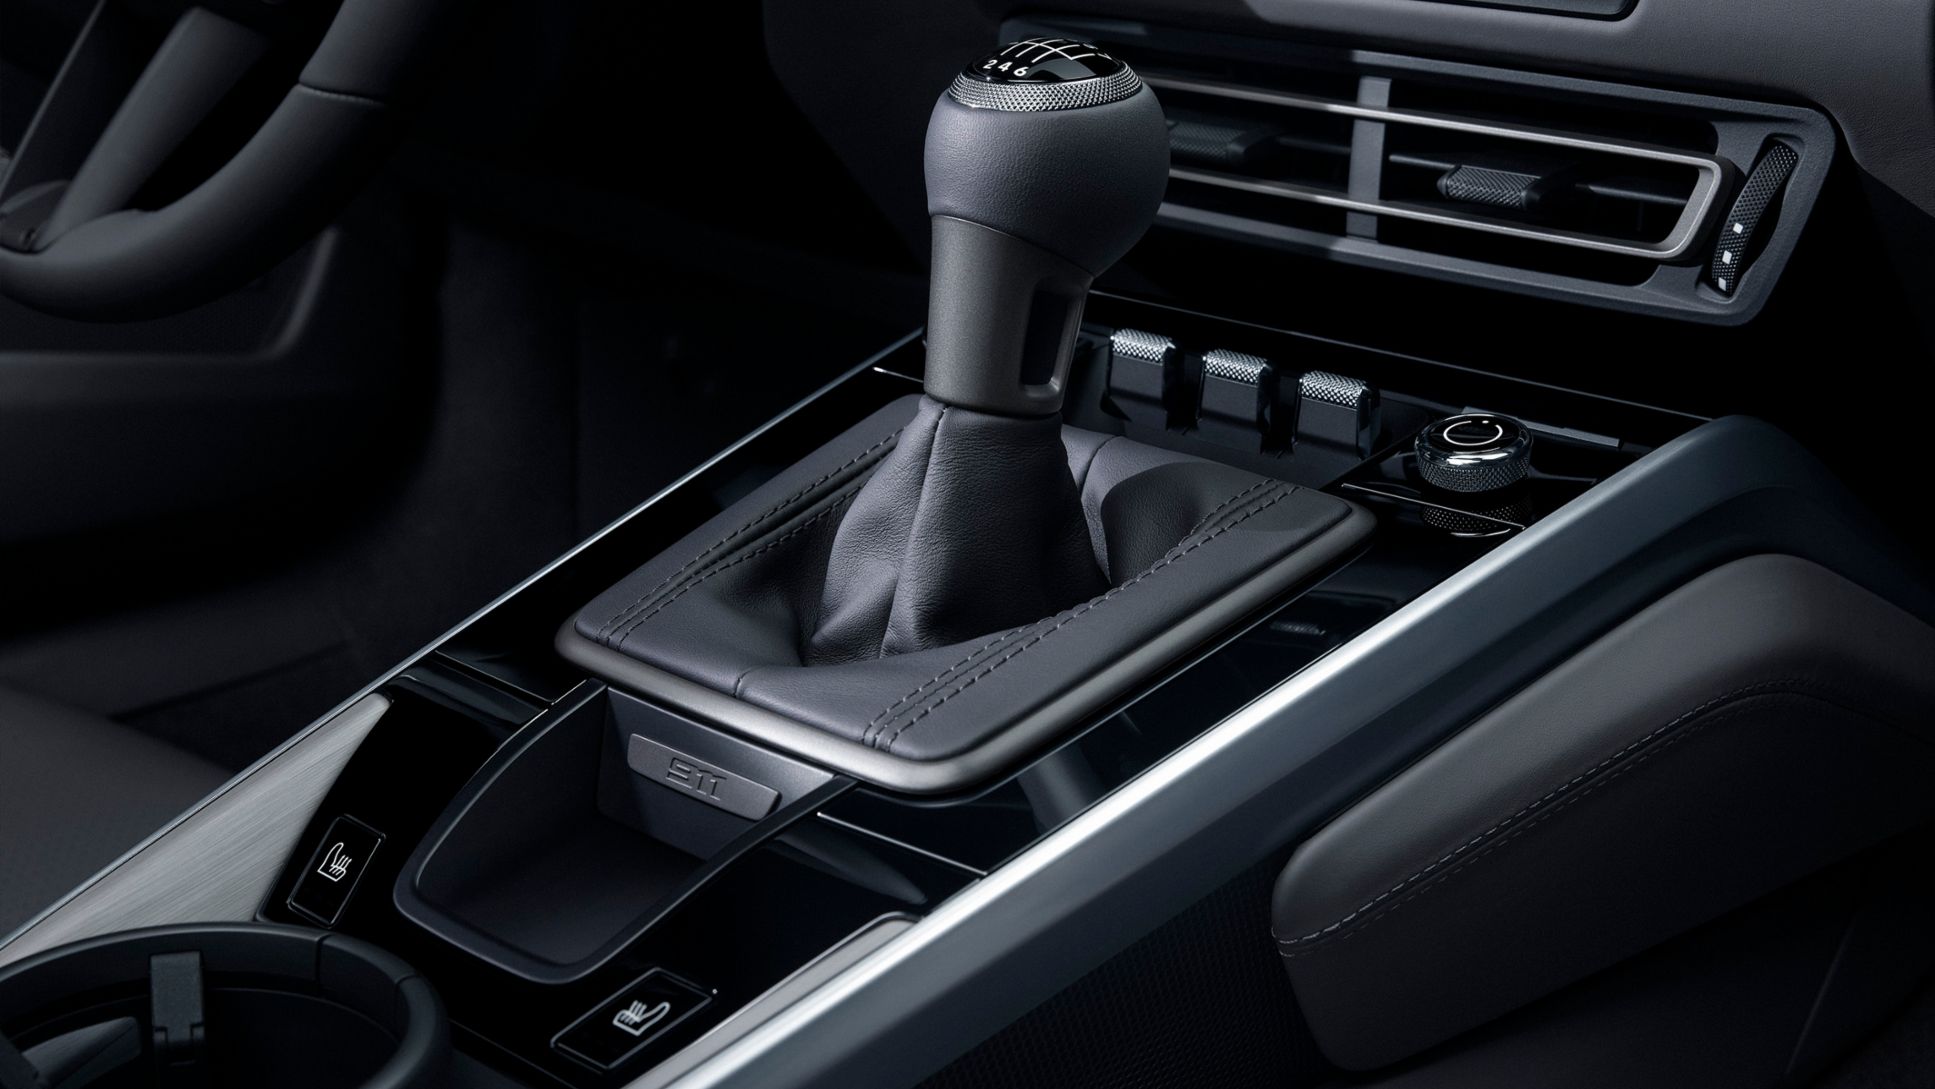 Seven-speed manual transmission option at no extra charge for 911 Carrera S and 911 Carrera 4S, 2019, PCNA